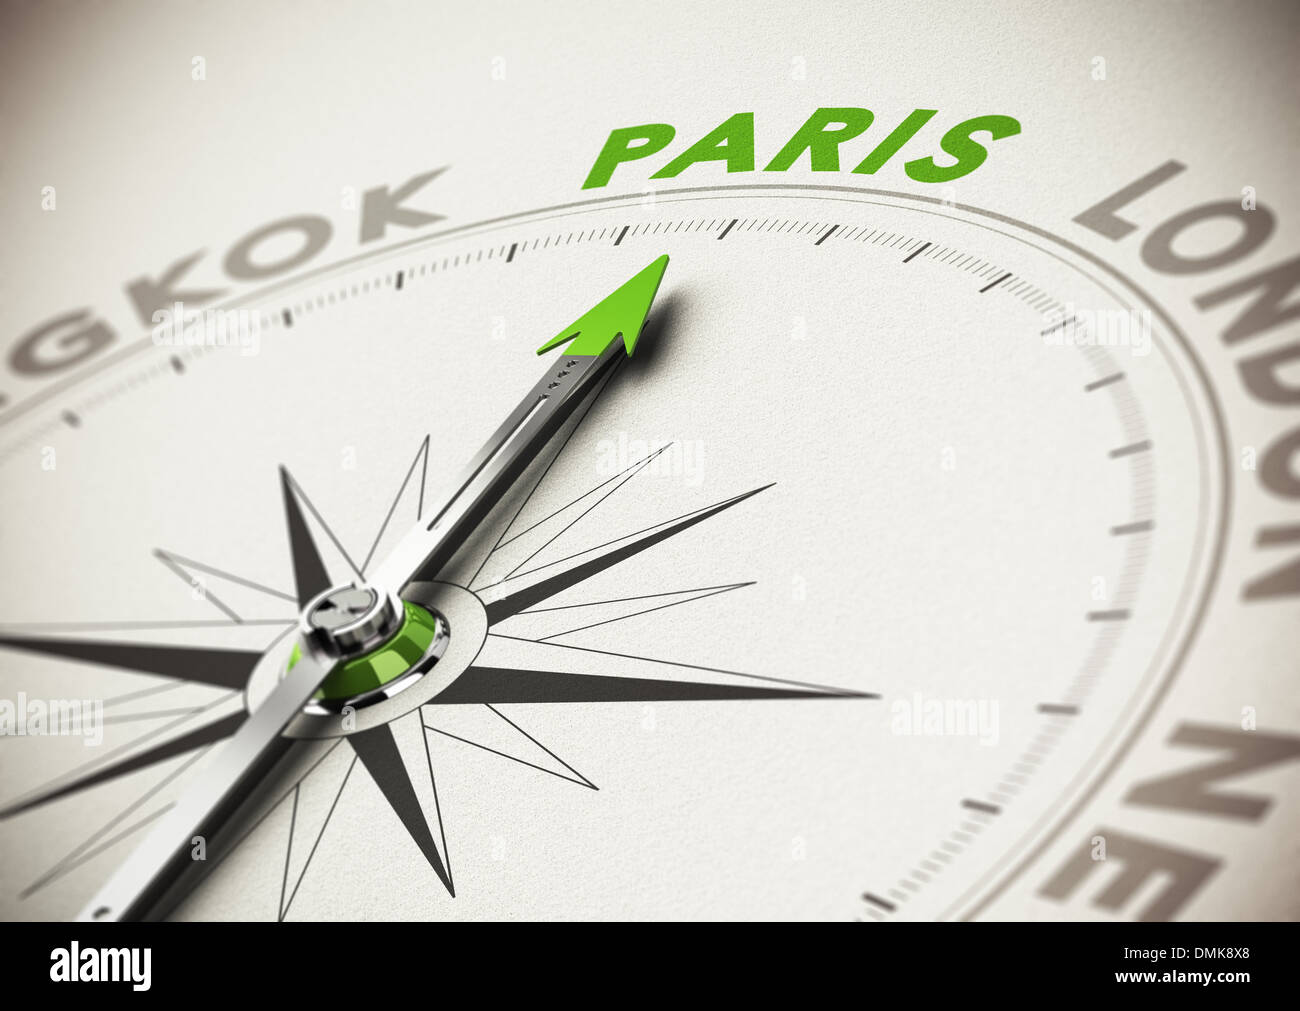 Compass needle pointing to paris, realistic 3D render with focus on the green word. Concept for choice of vacation, best places. Stock Photo